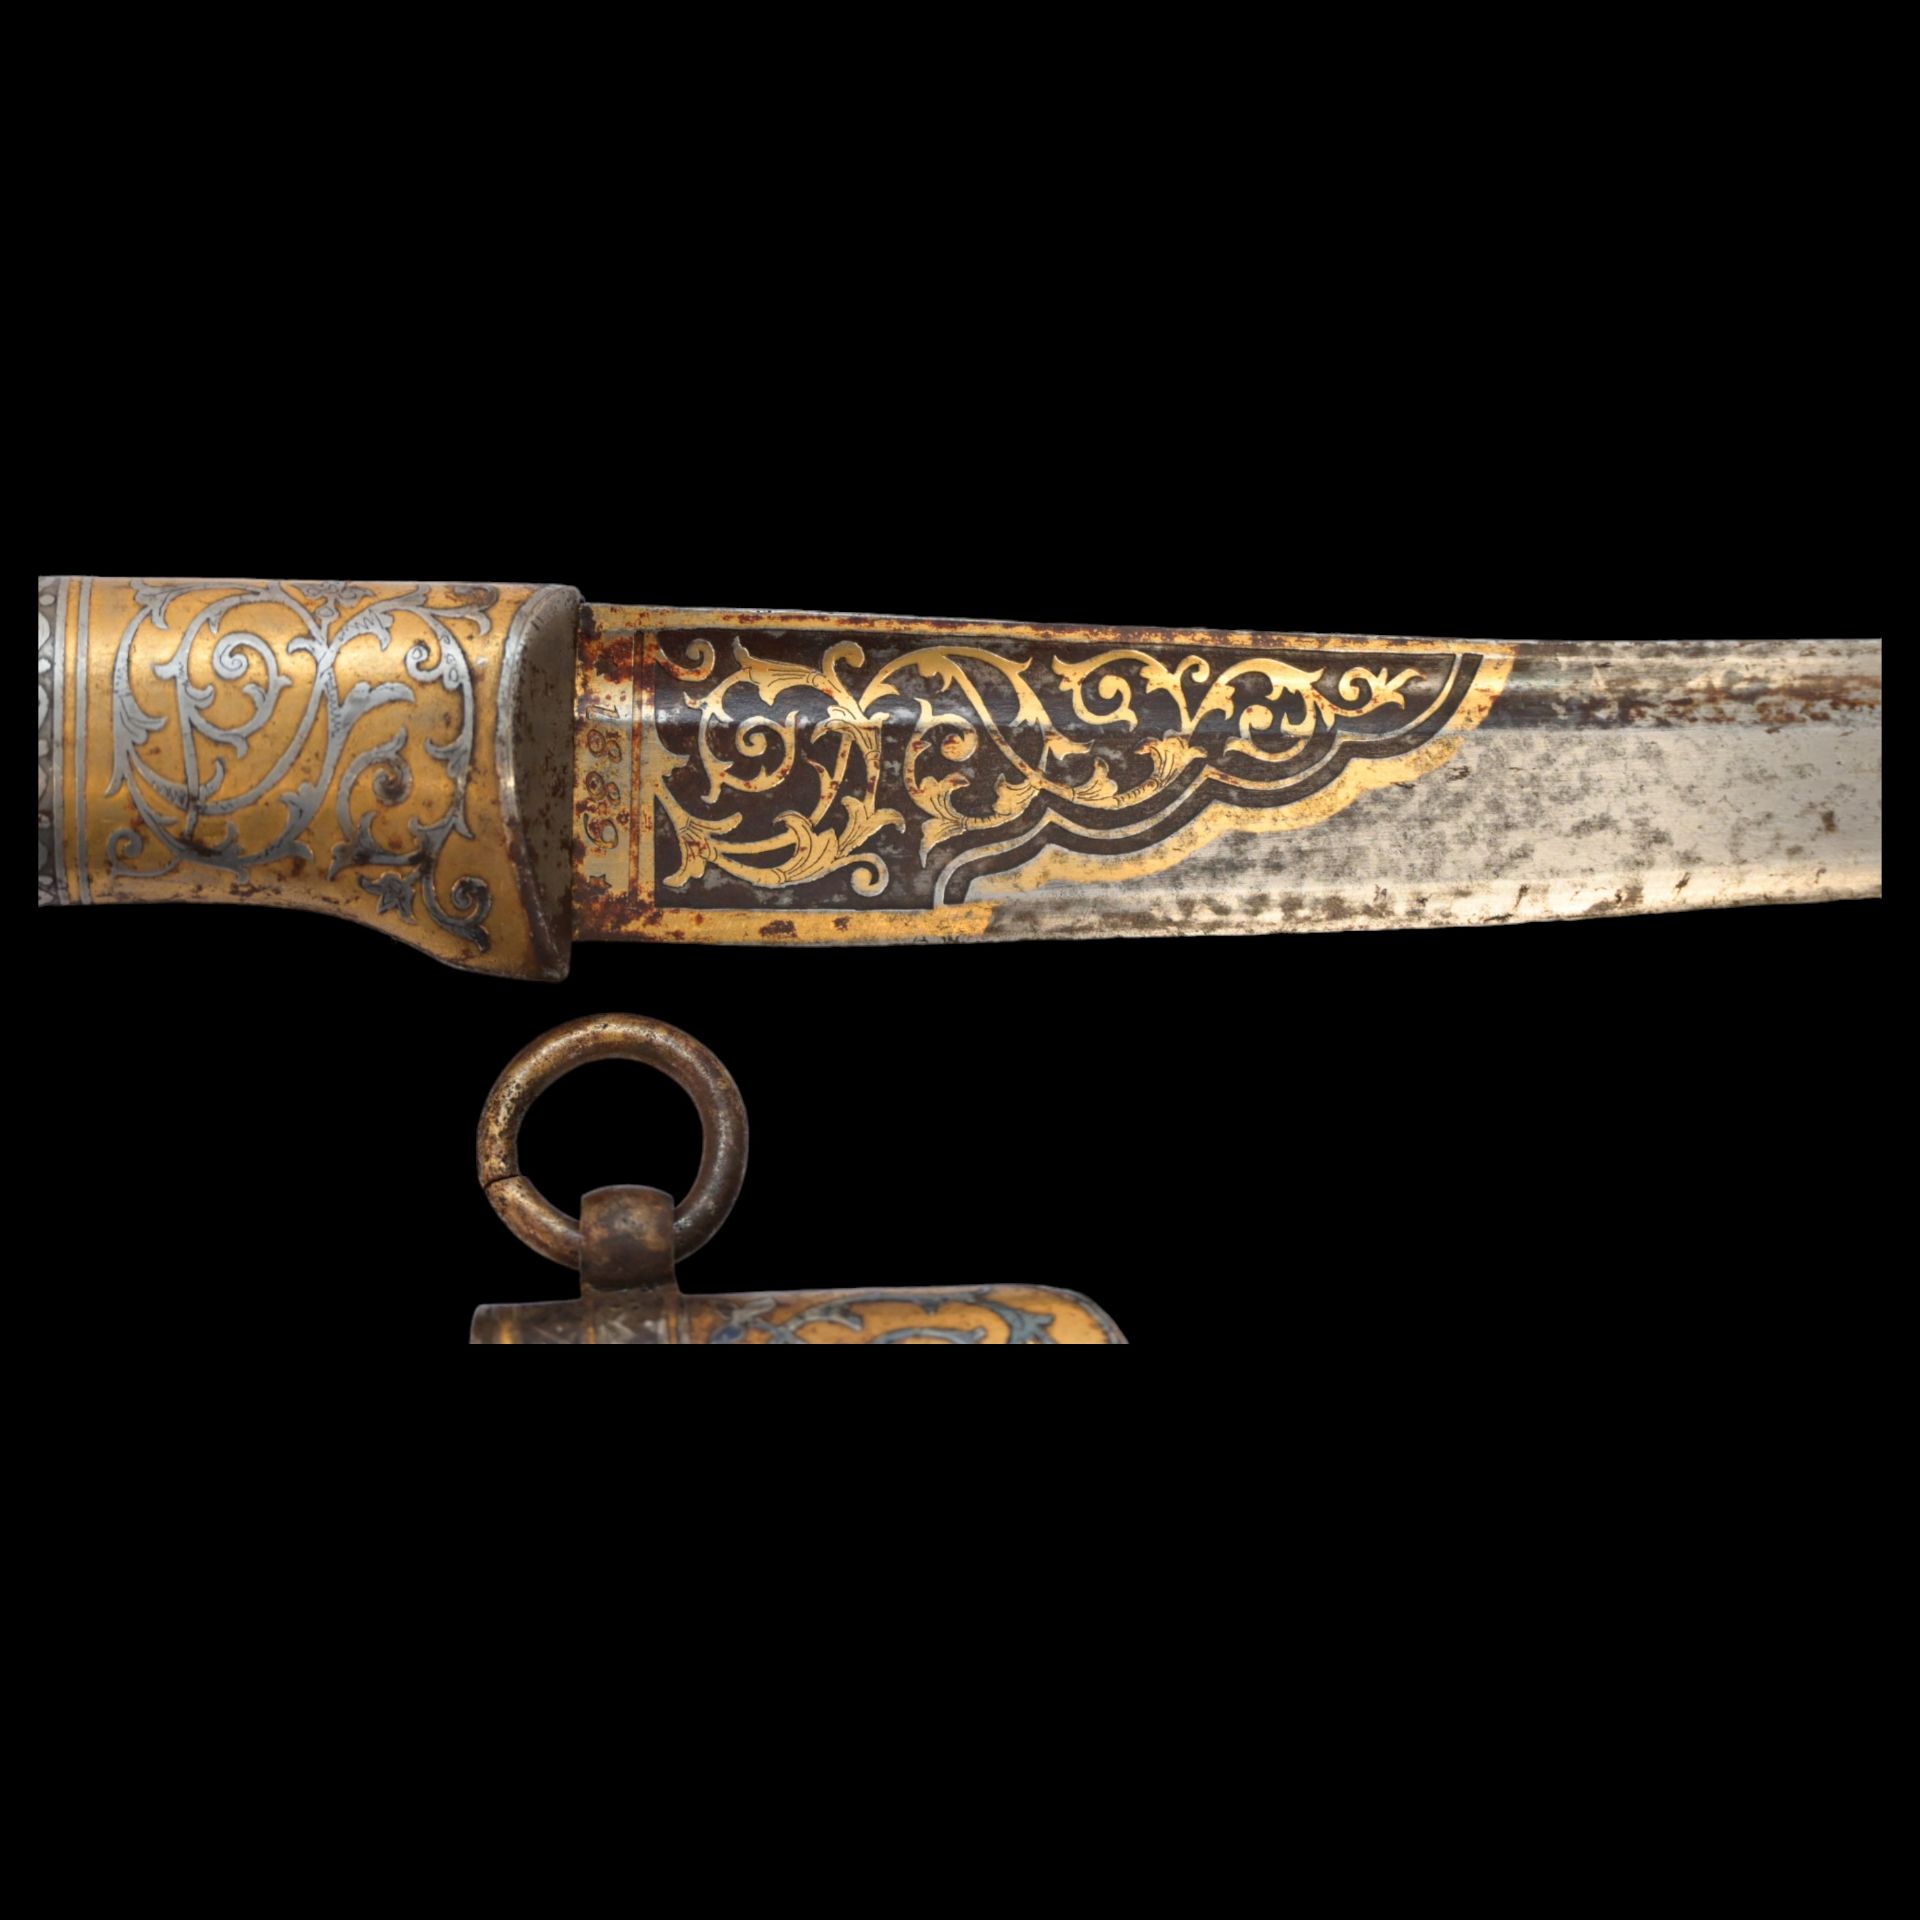 RARE HUNTING KNIFE, DECORATED WITH GOLD AND BLUE, RUSSIAN EMPIRE, ZLATOUST, 1889. - Image 19 of 26